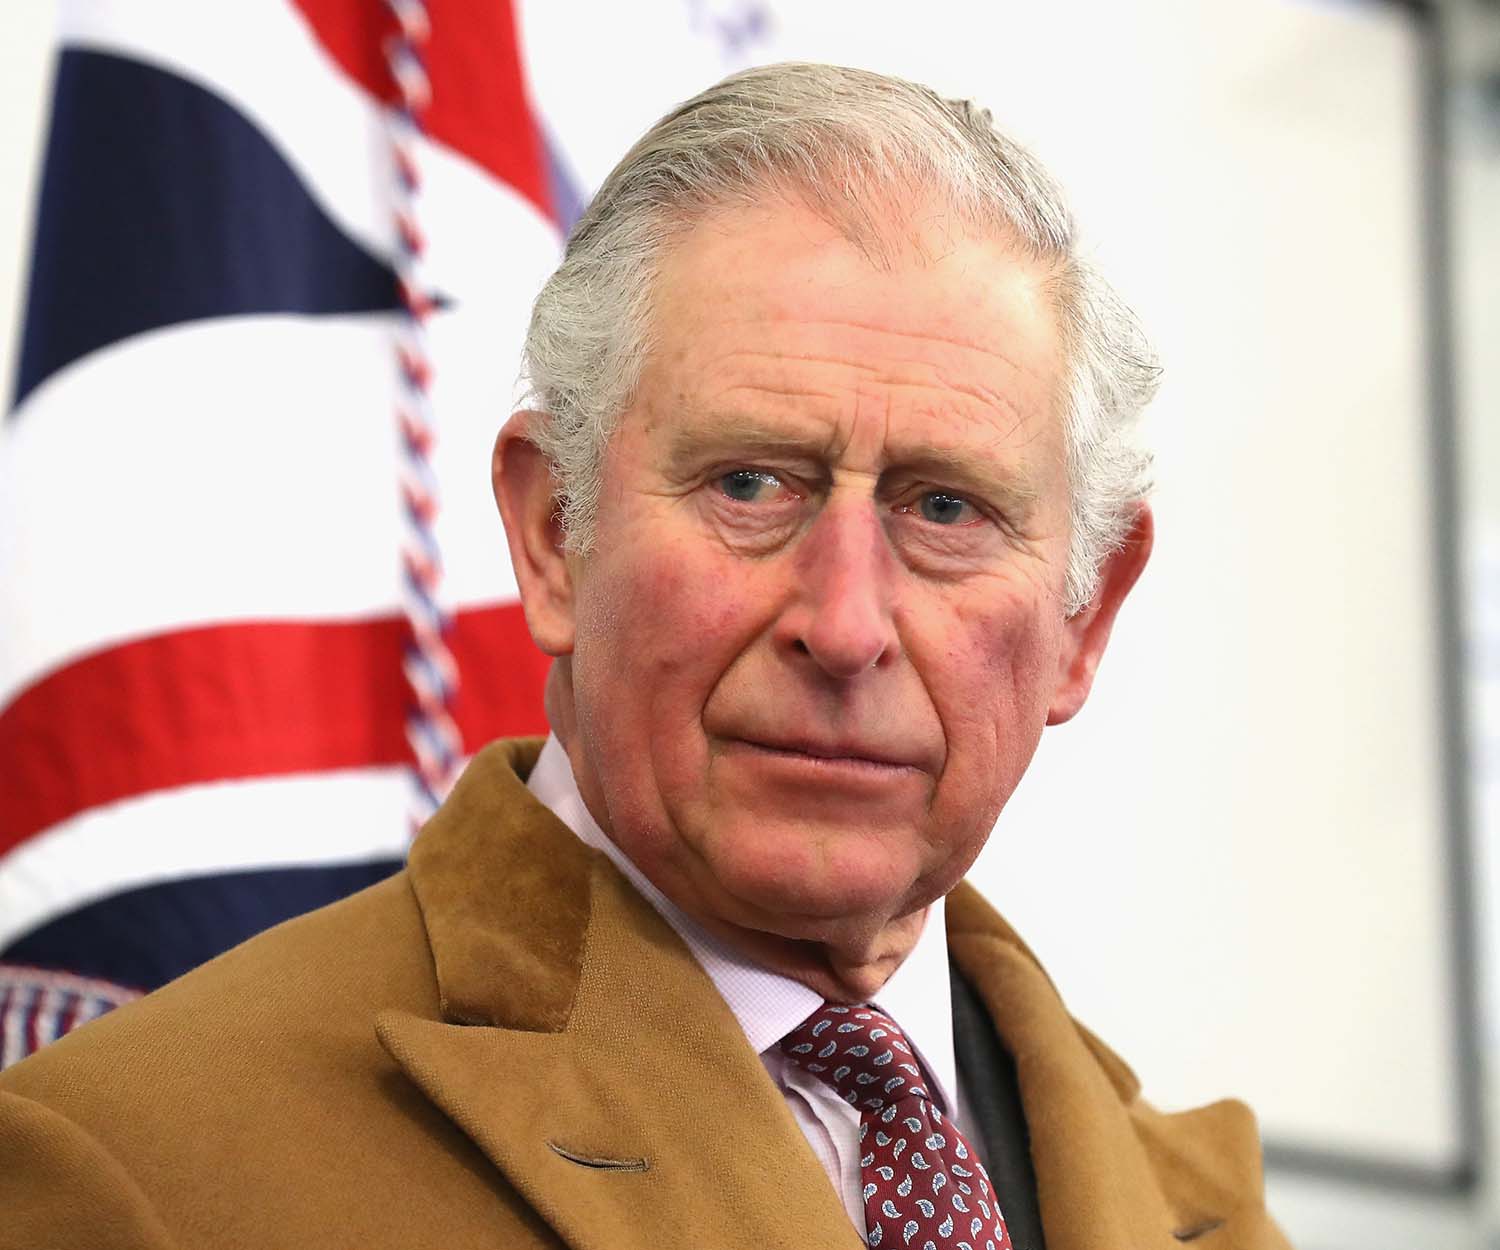 Prince Charles’ emotional message to the people of Australia as its bush fires continue to rage